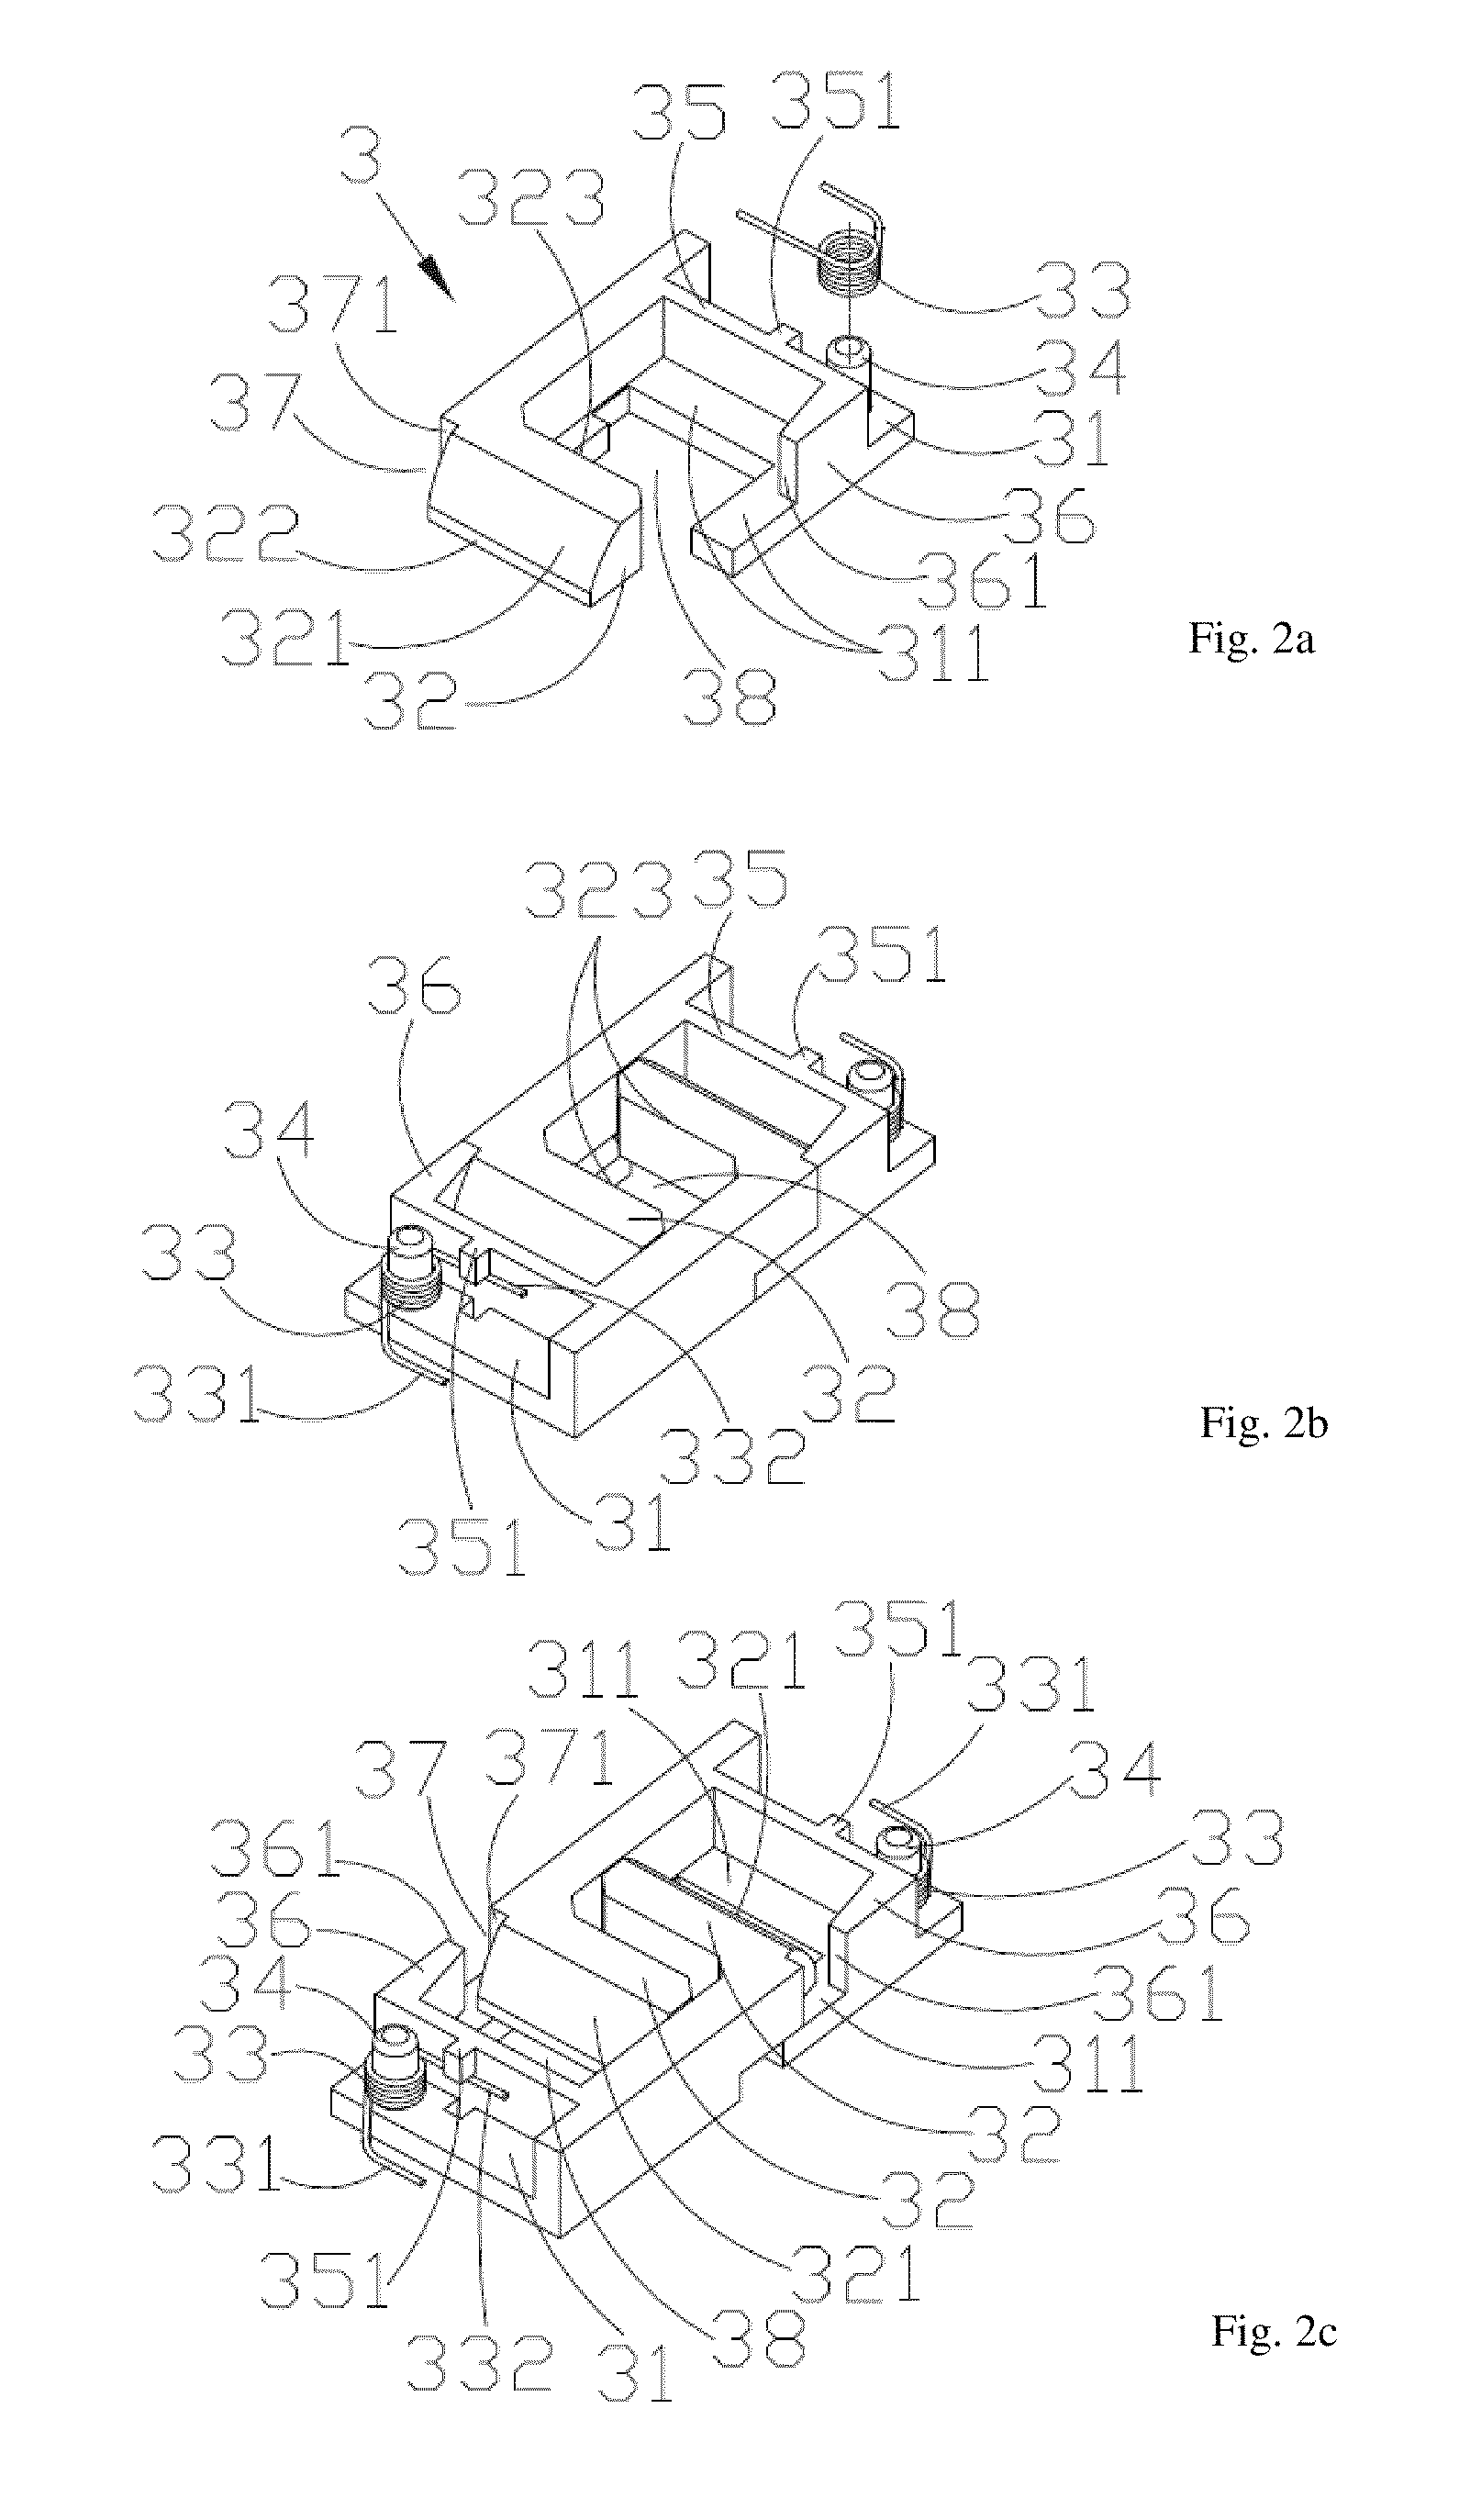 Tamper resistant power receptacle having a safety shutter